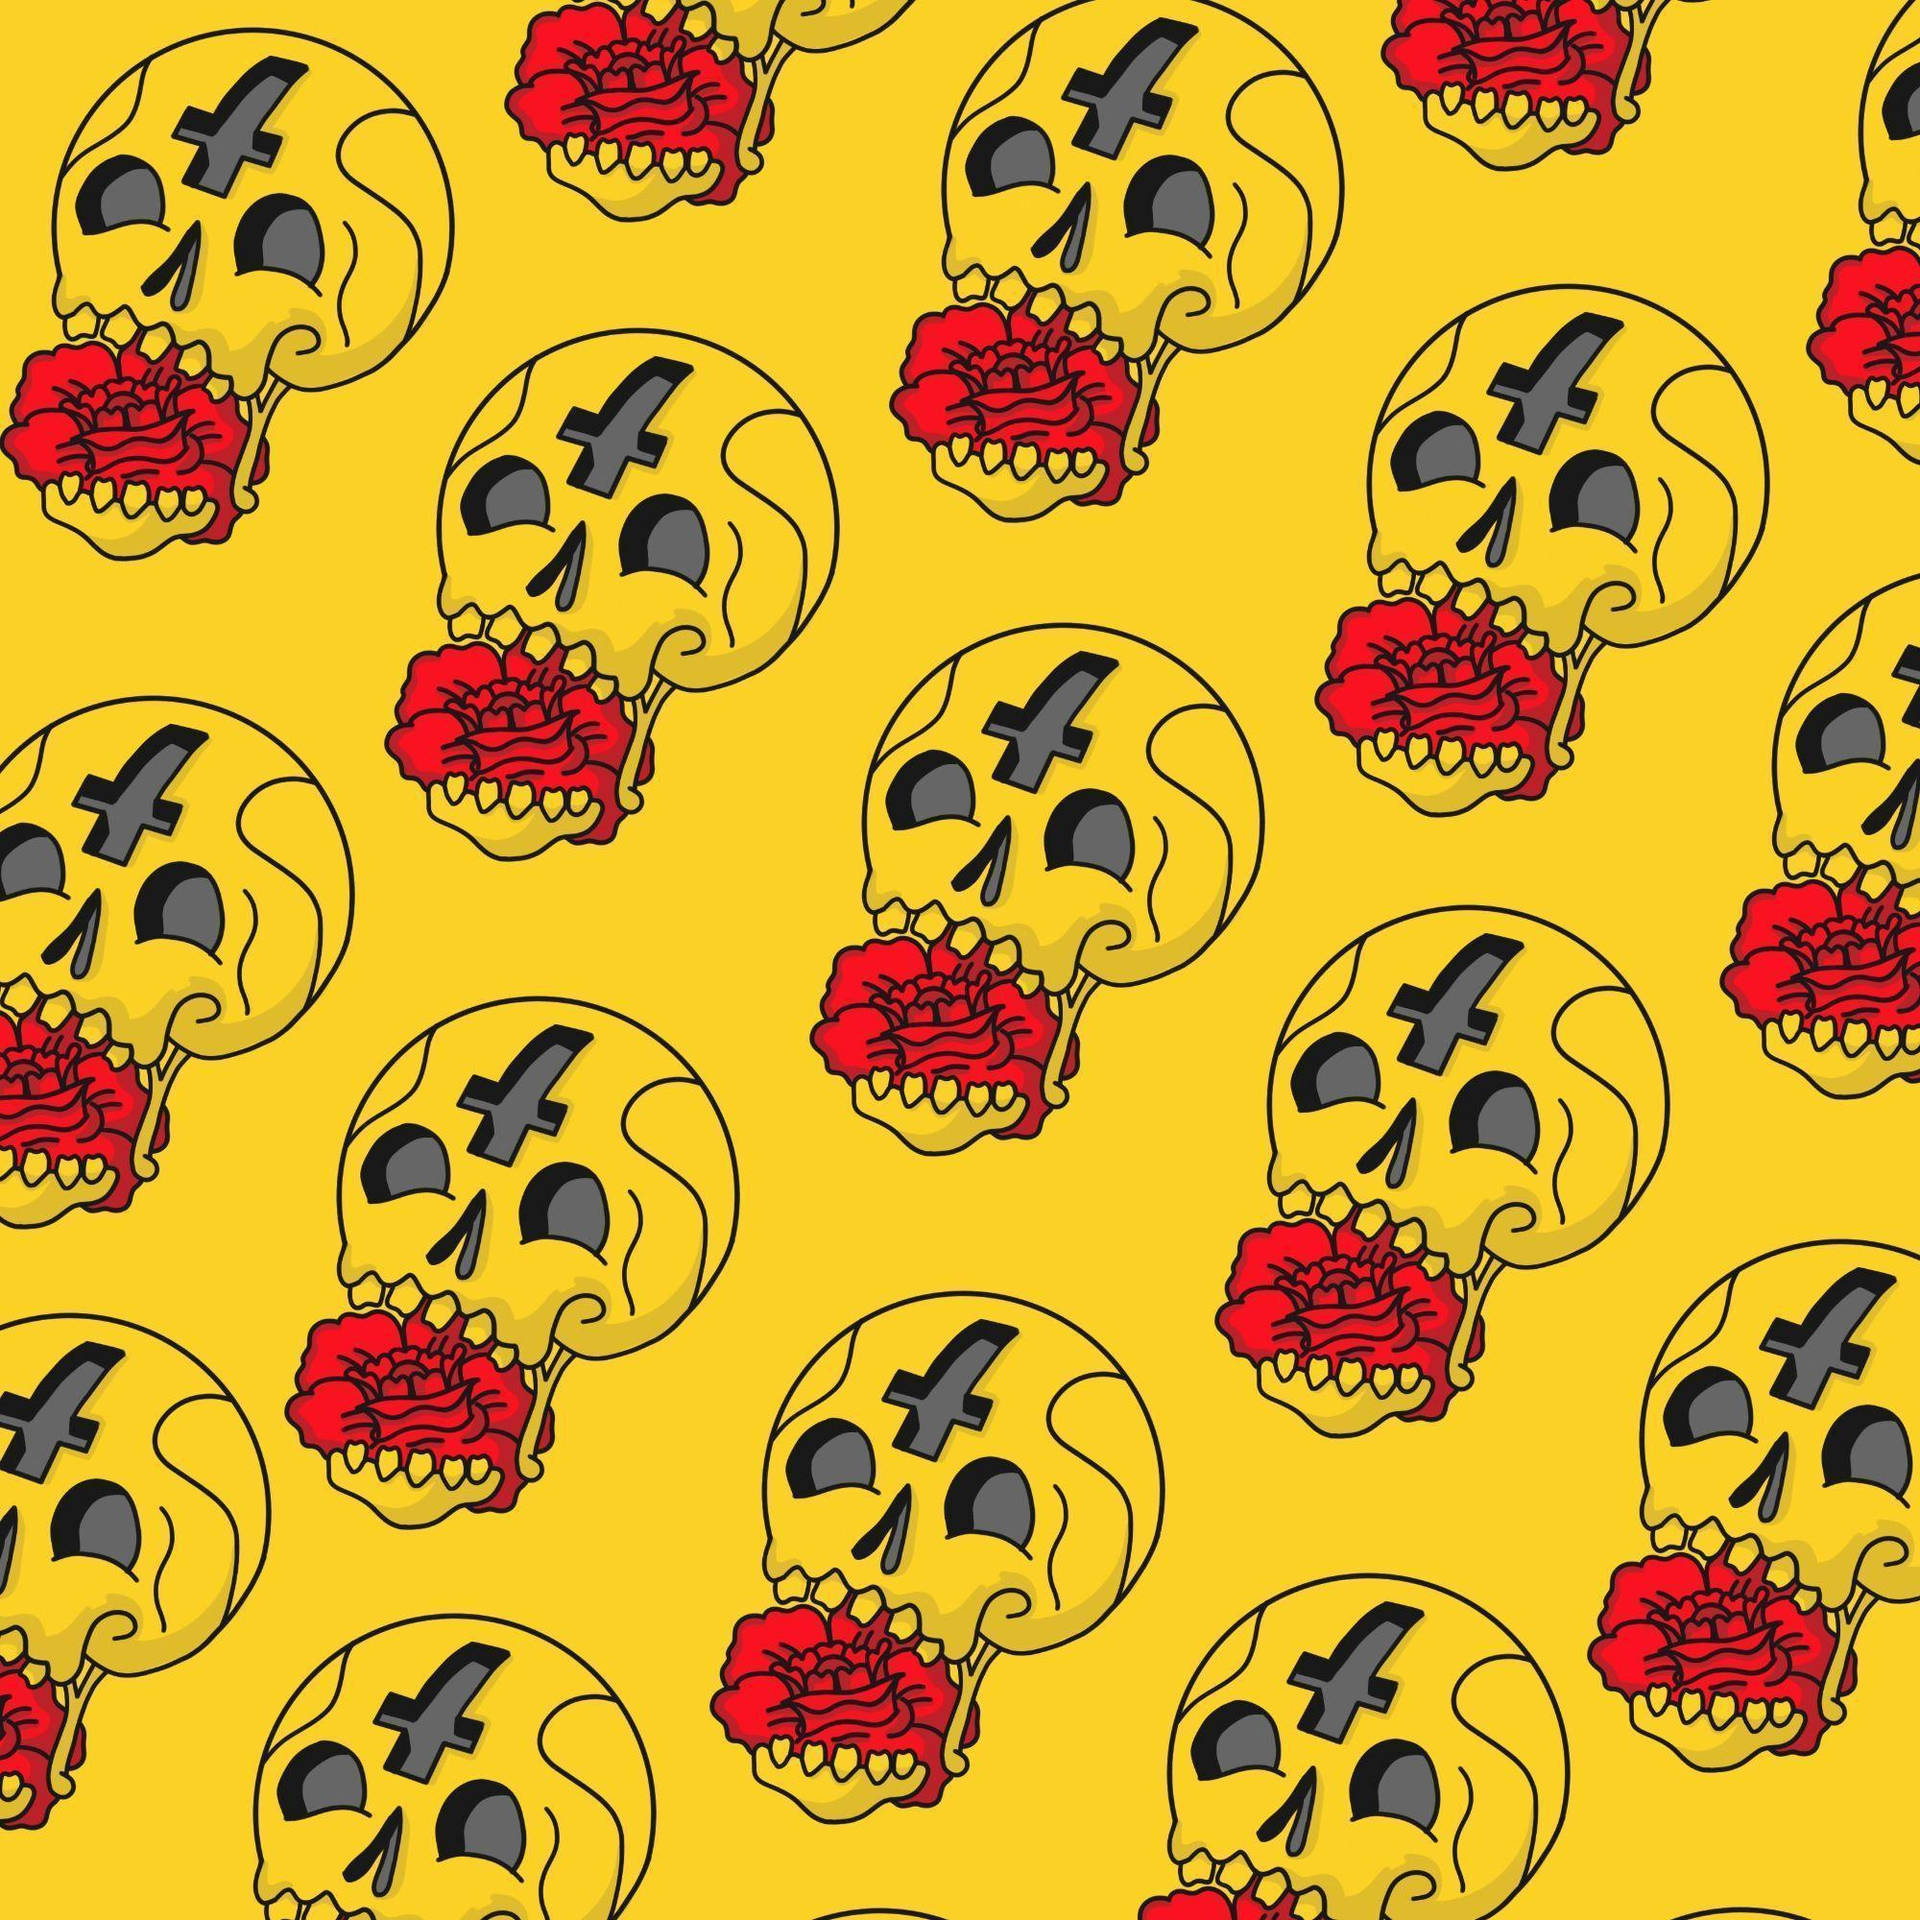 A Pattern Of Skulls On Yellow Background Wallpaper